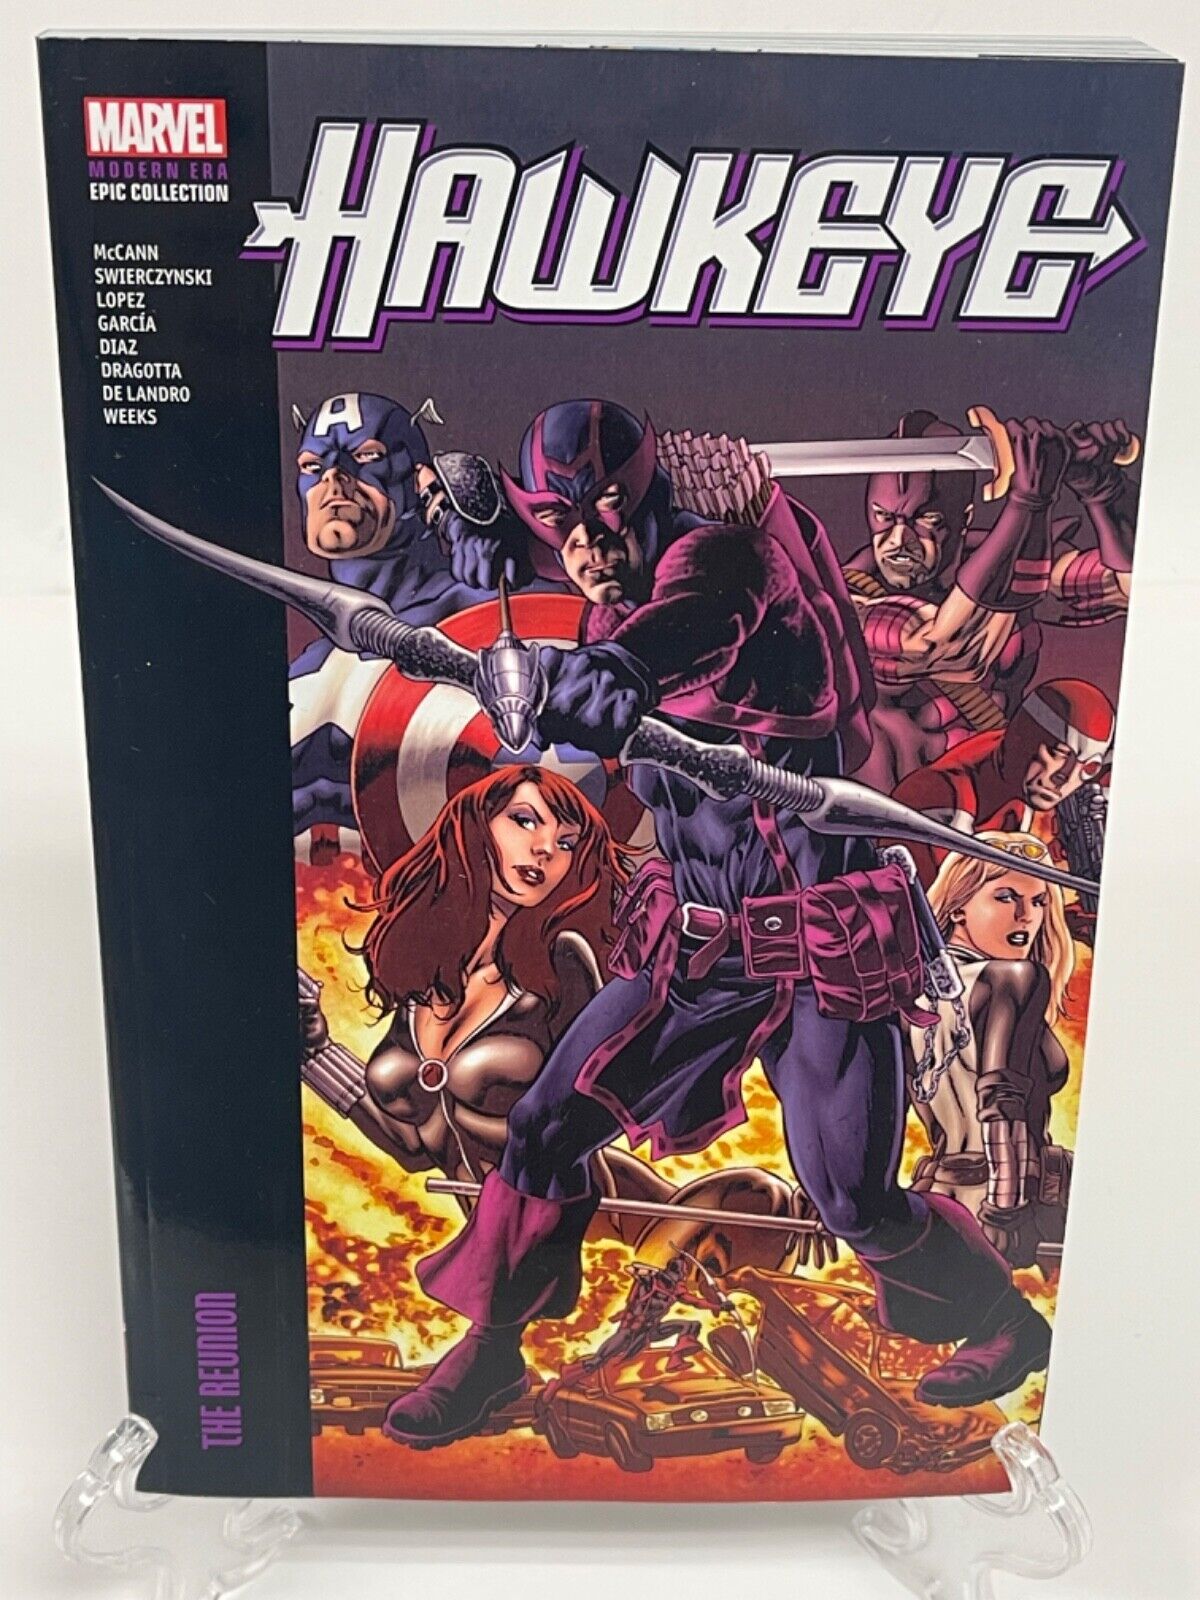 Hawkeye Modern Era Epic Collection Vol 1 The Reunion New Marvel TPB Paperback